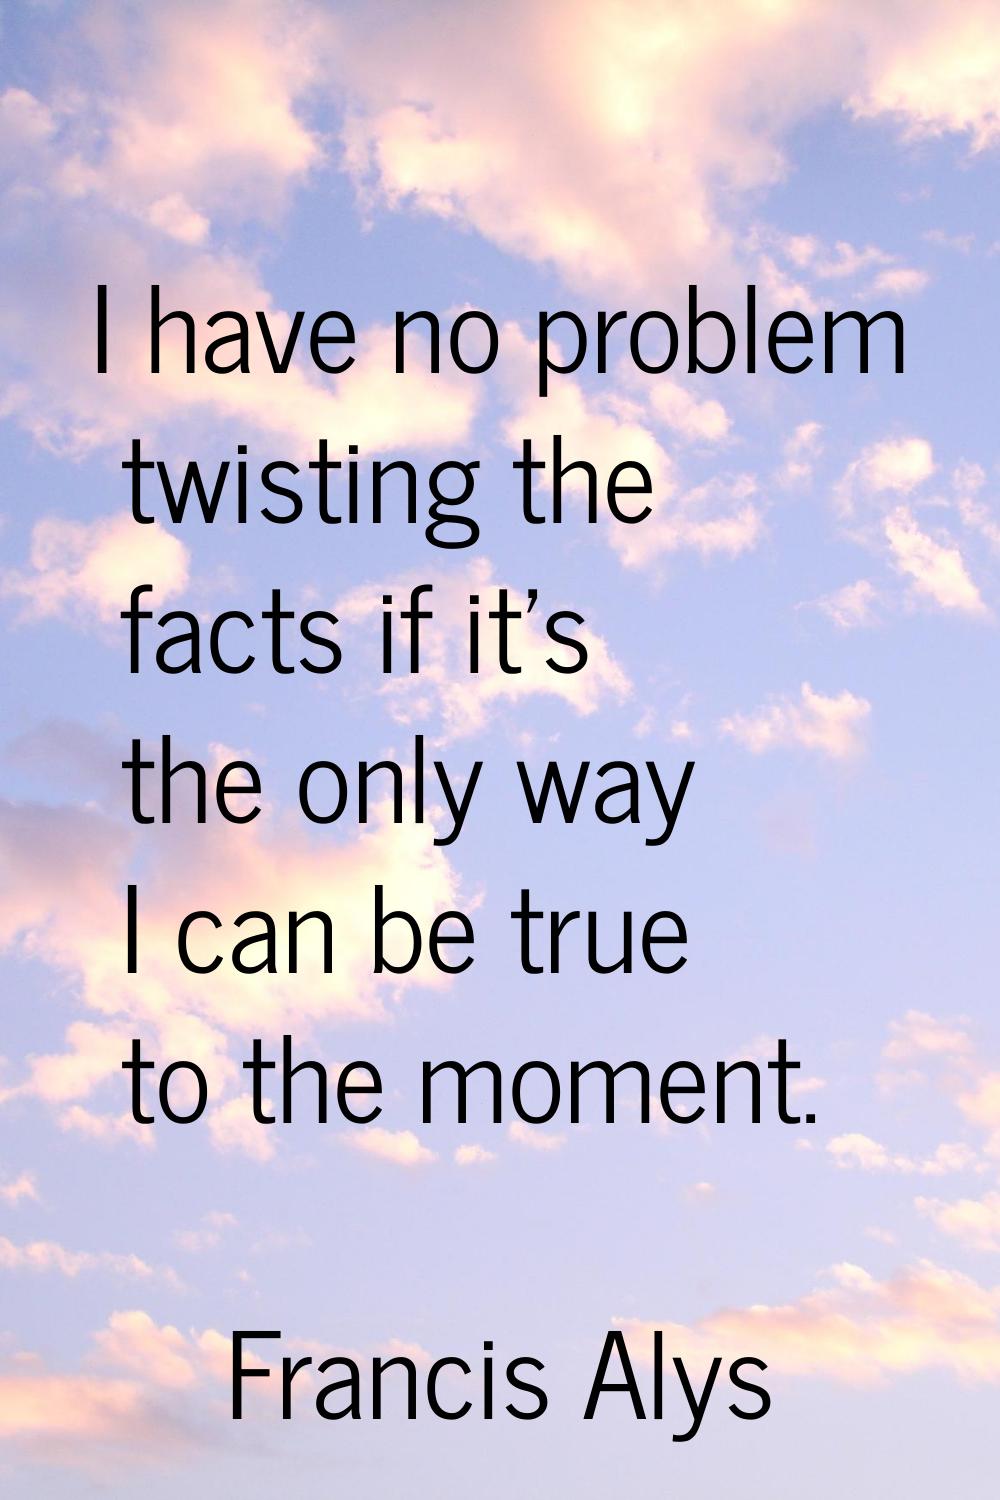 I have no problem twisting the facts if it's the only way I can be true to the moment.